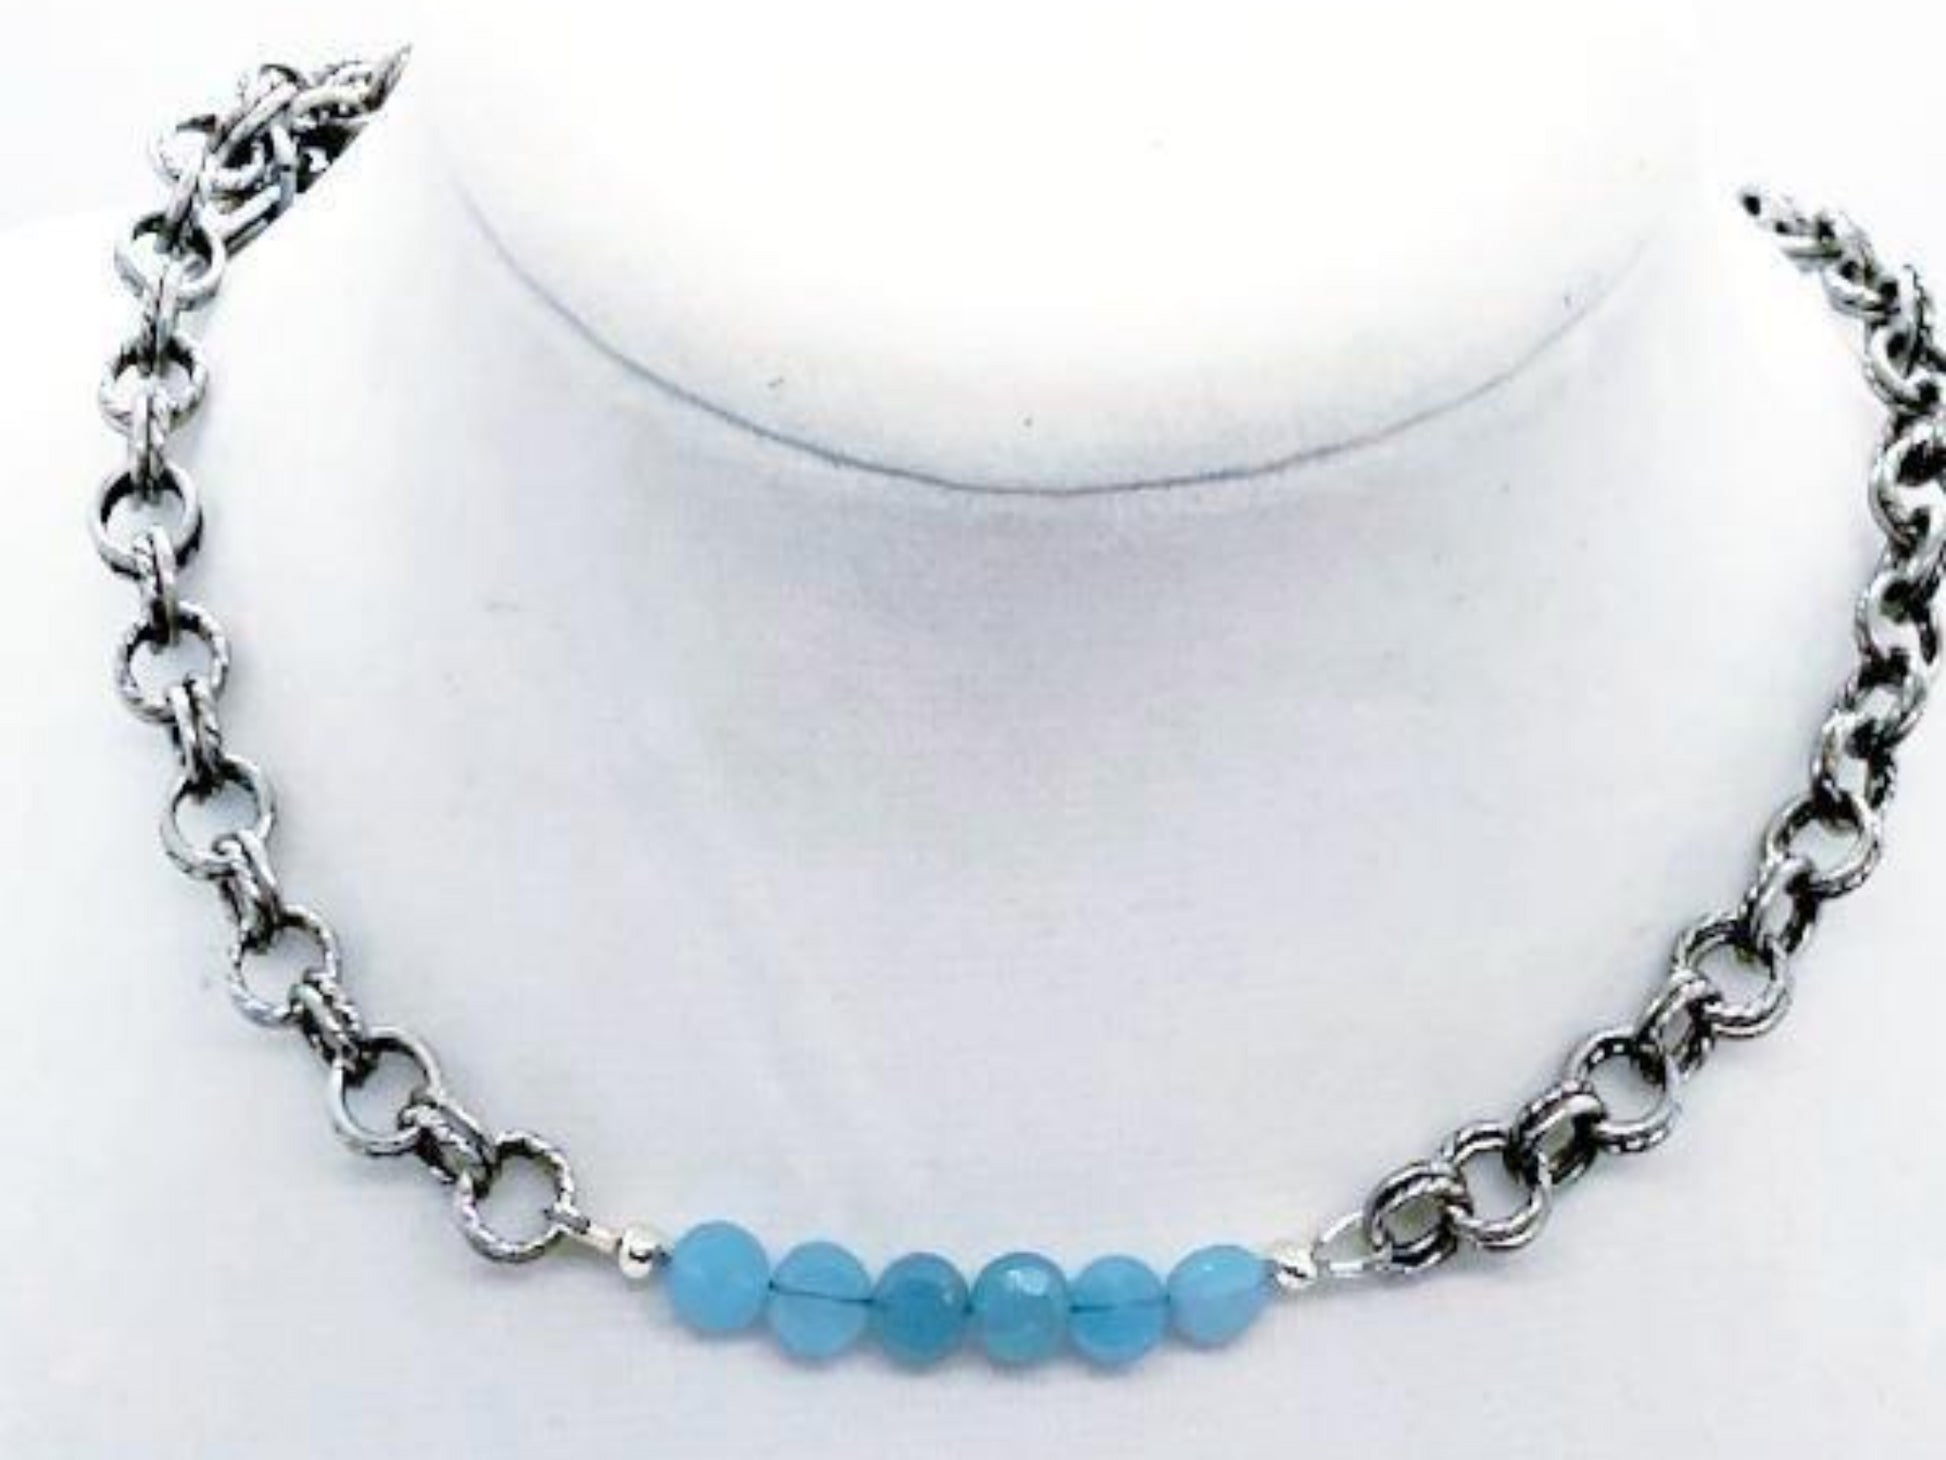 Flat Gemstone Double Chain Necklace - Emmis Jewelry, Necklace, [product_color]